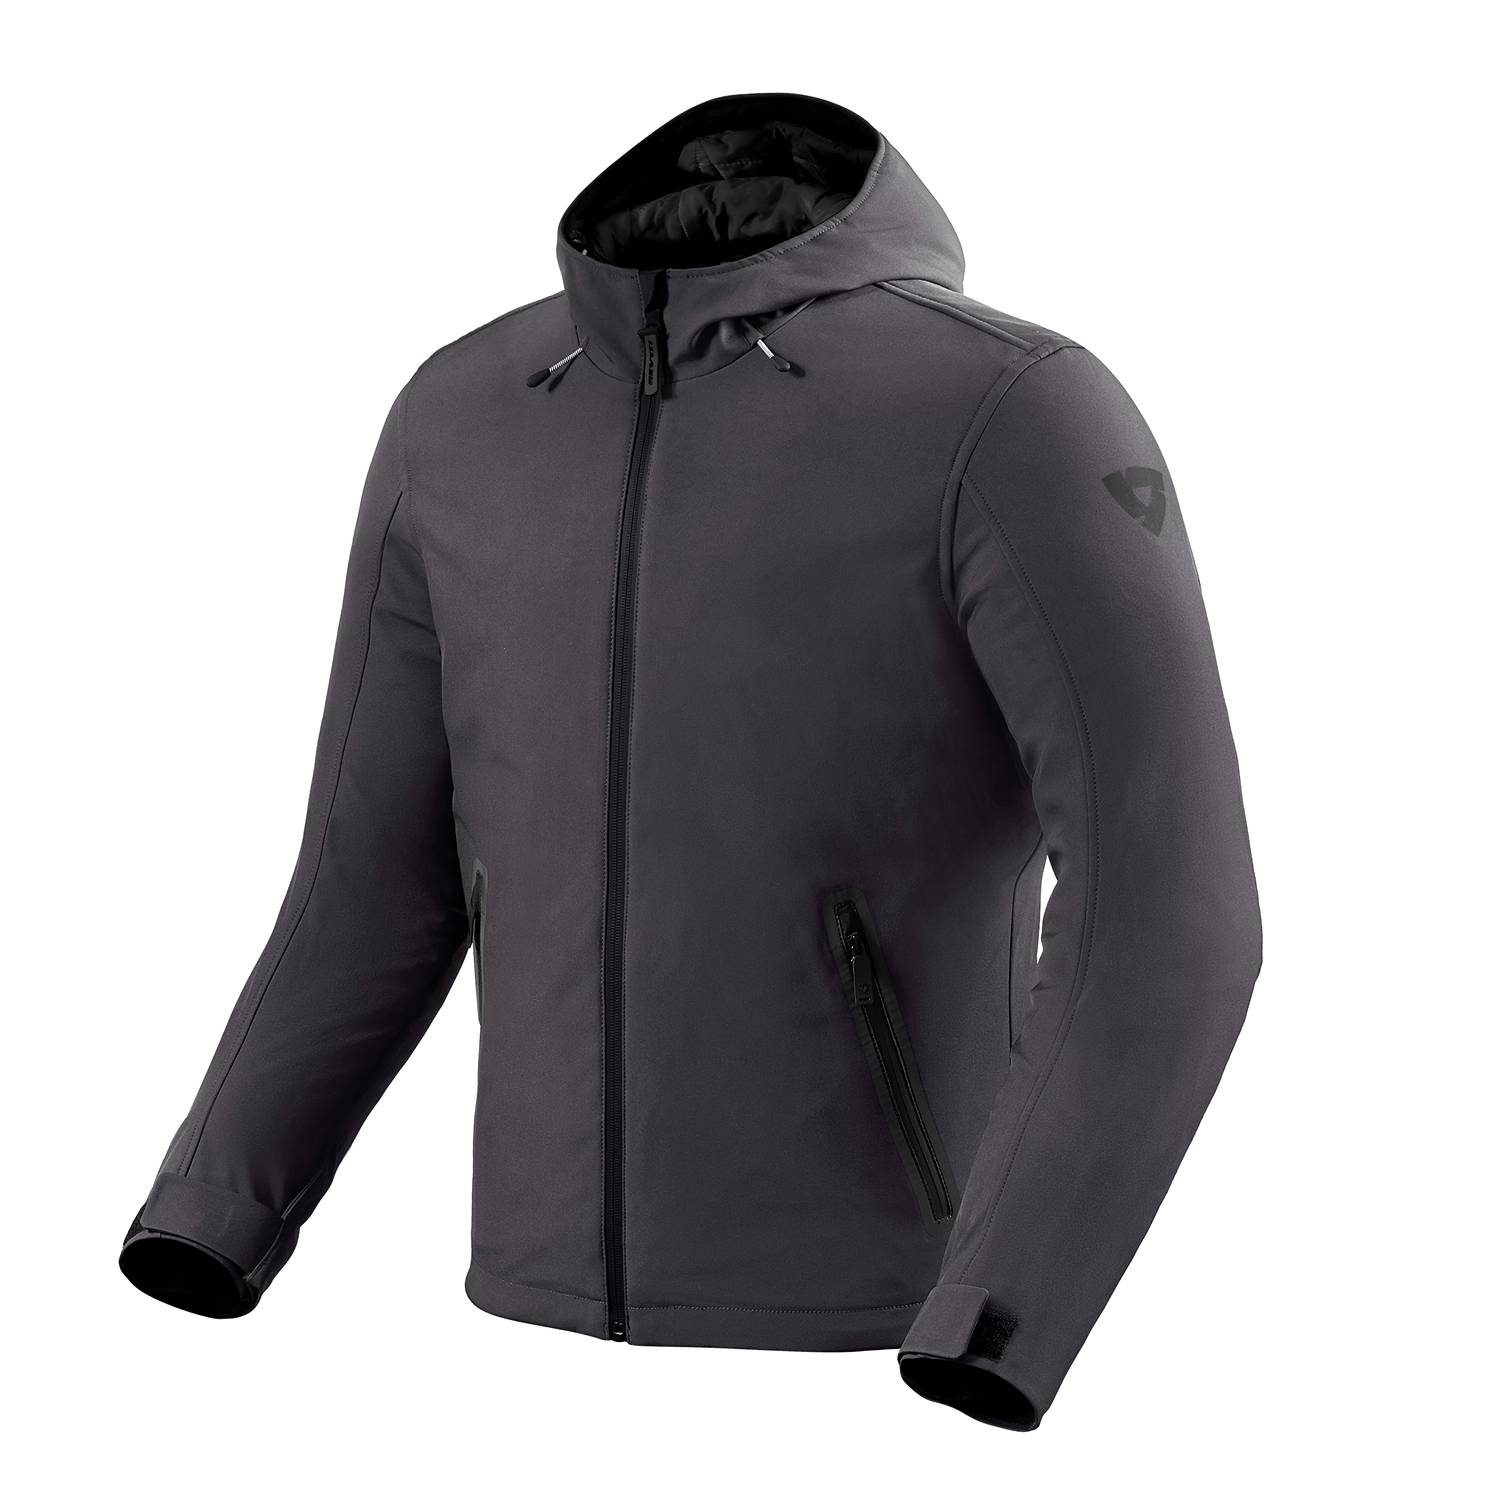 Image of REV'IT! Traffic H2O Veste Anthracite Taille 2XL